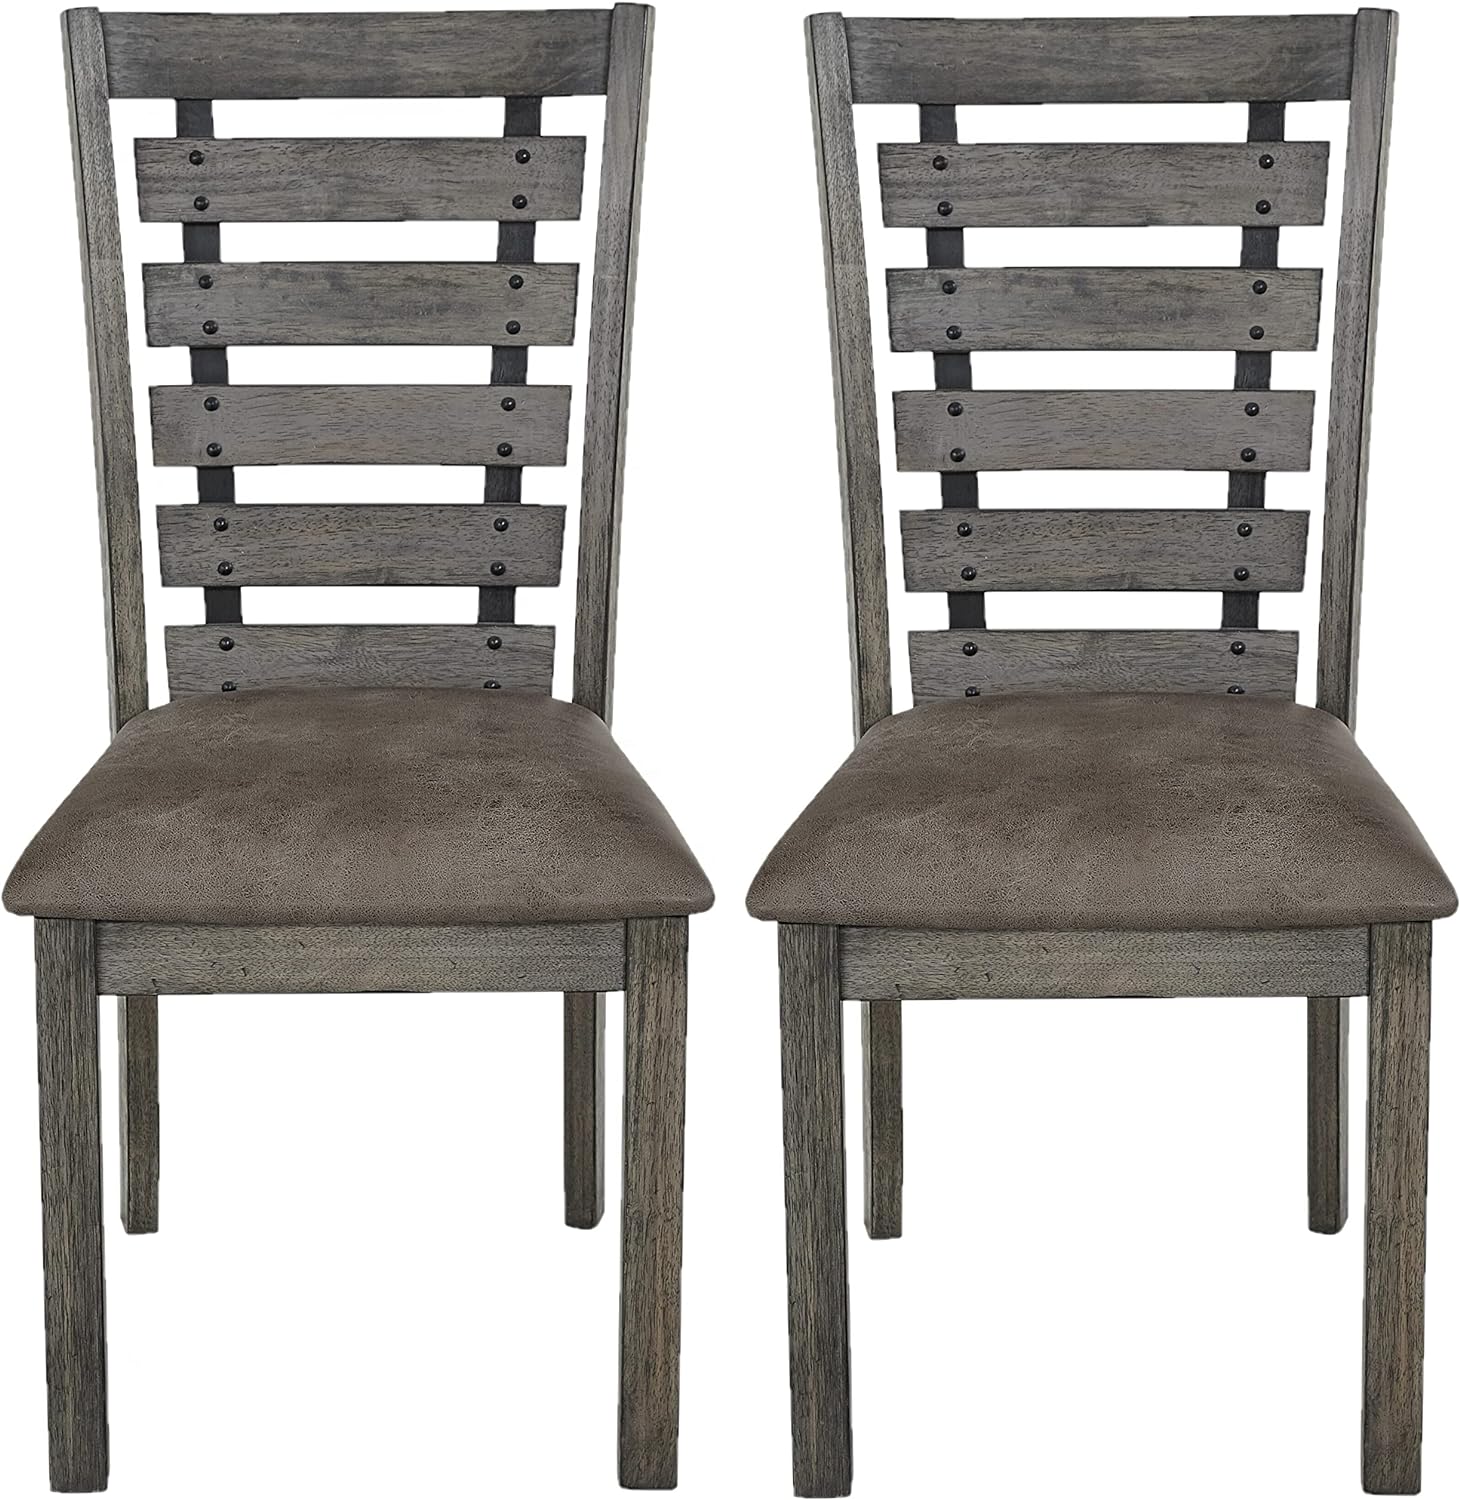 New Assembled SET OF 2 Great Quality Progressive Furniture Fiji Dining Chairs in Grey with comfortable wide seating, Retails $342+